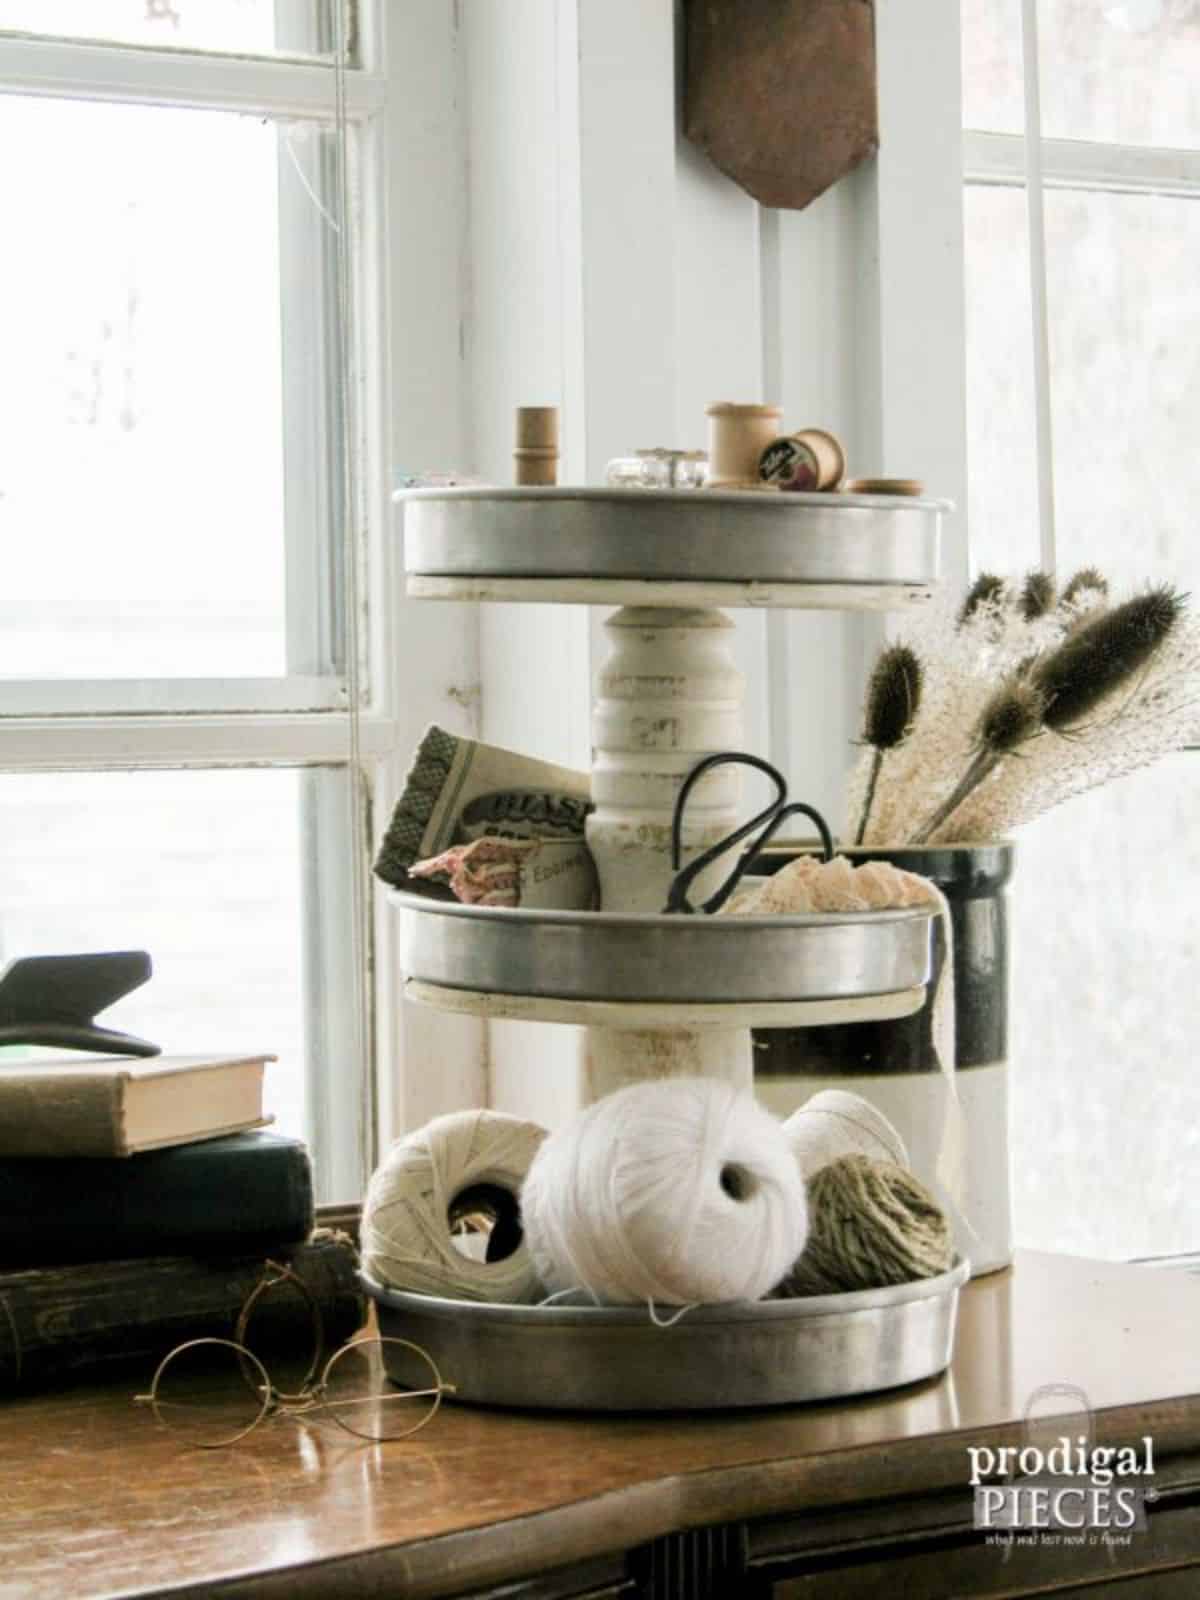 DIY Tiered Stand from Repurposed Junk